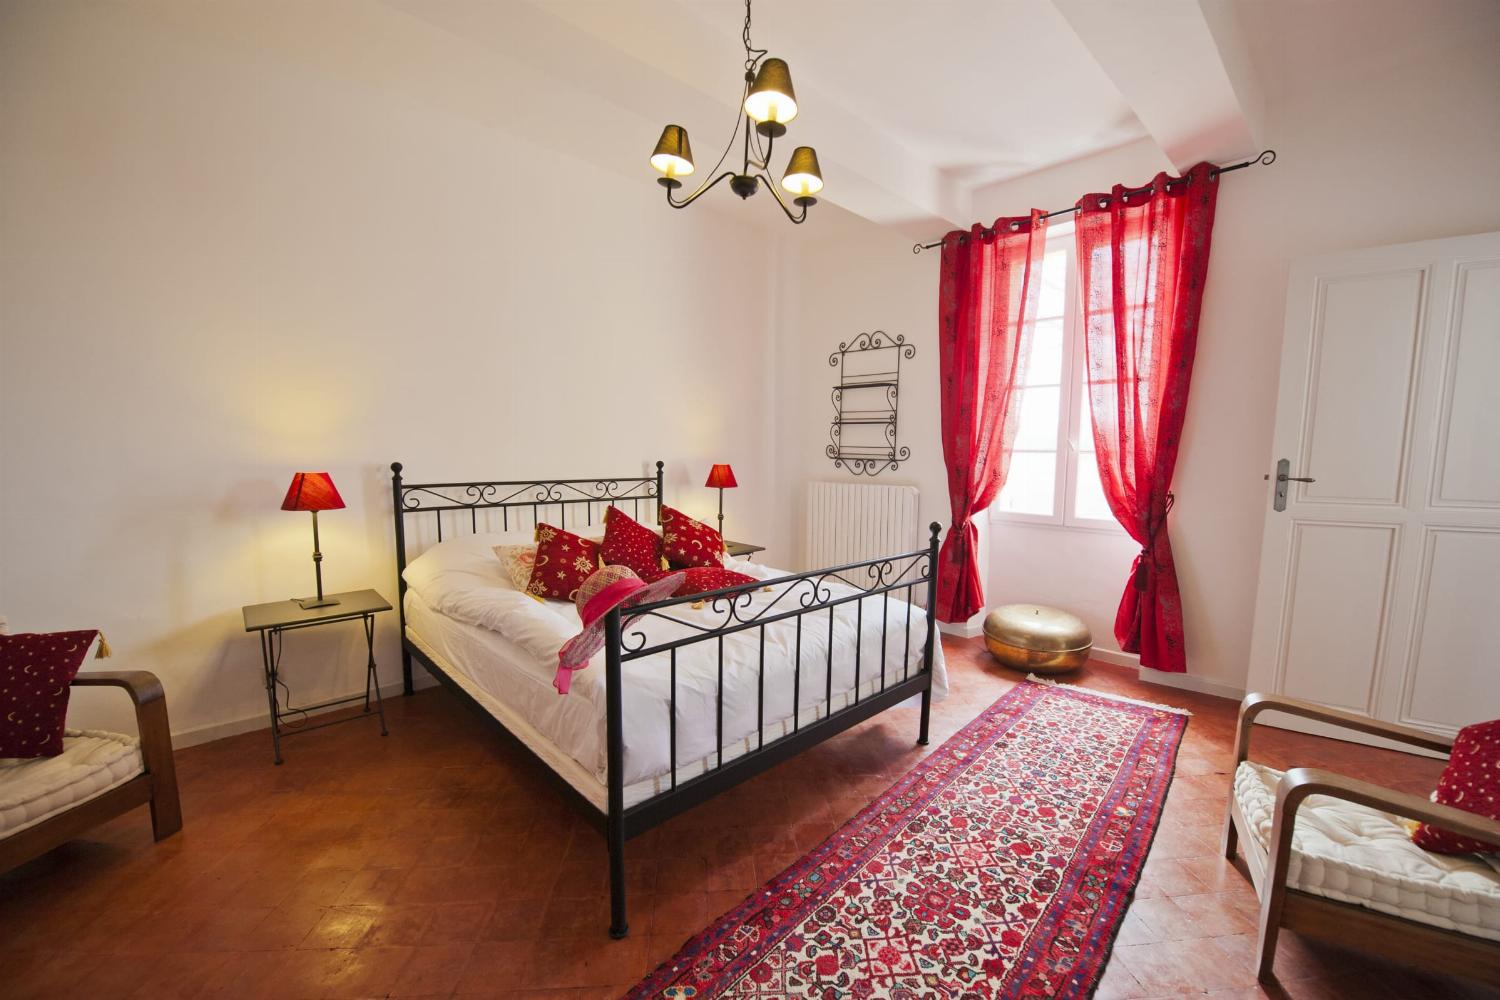 Bedroom | Rental accommodation in Provence